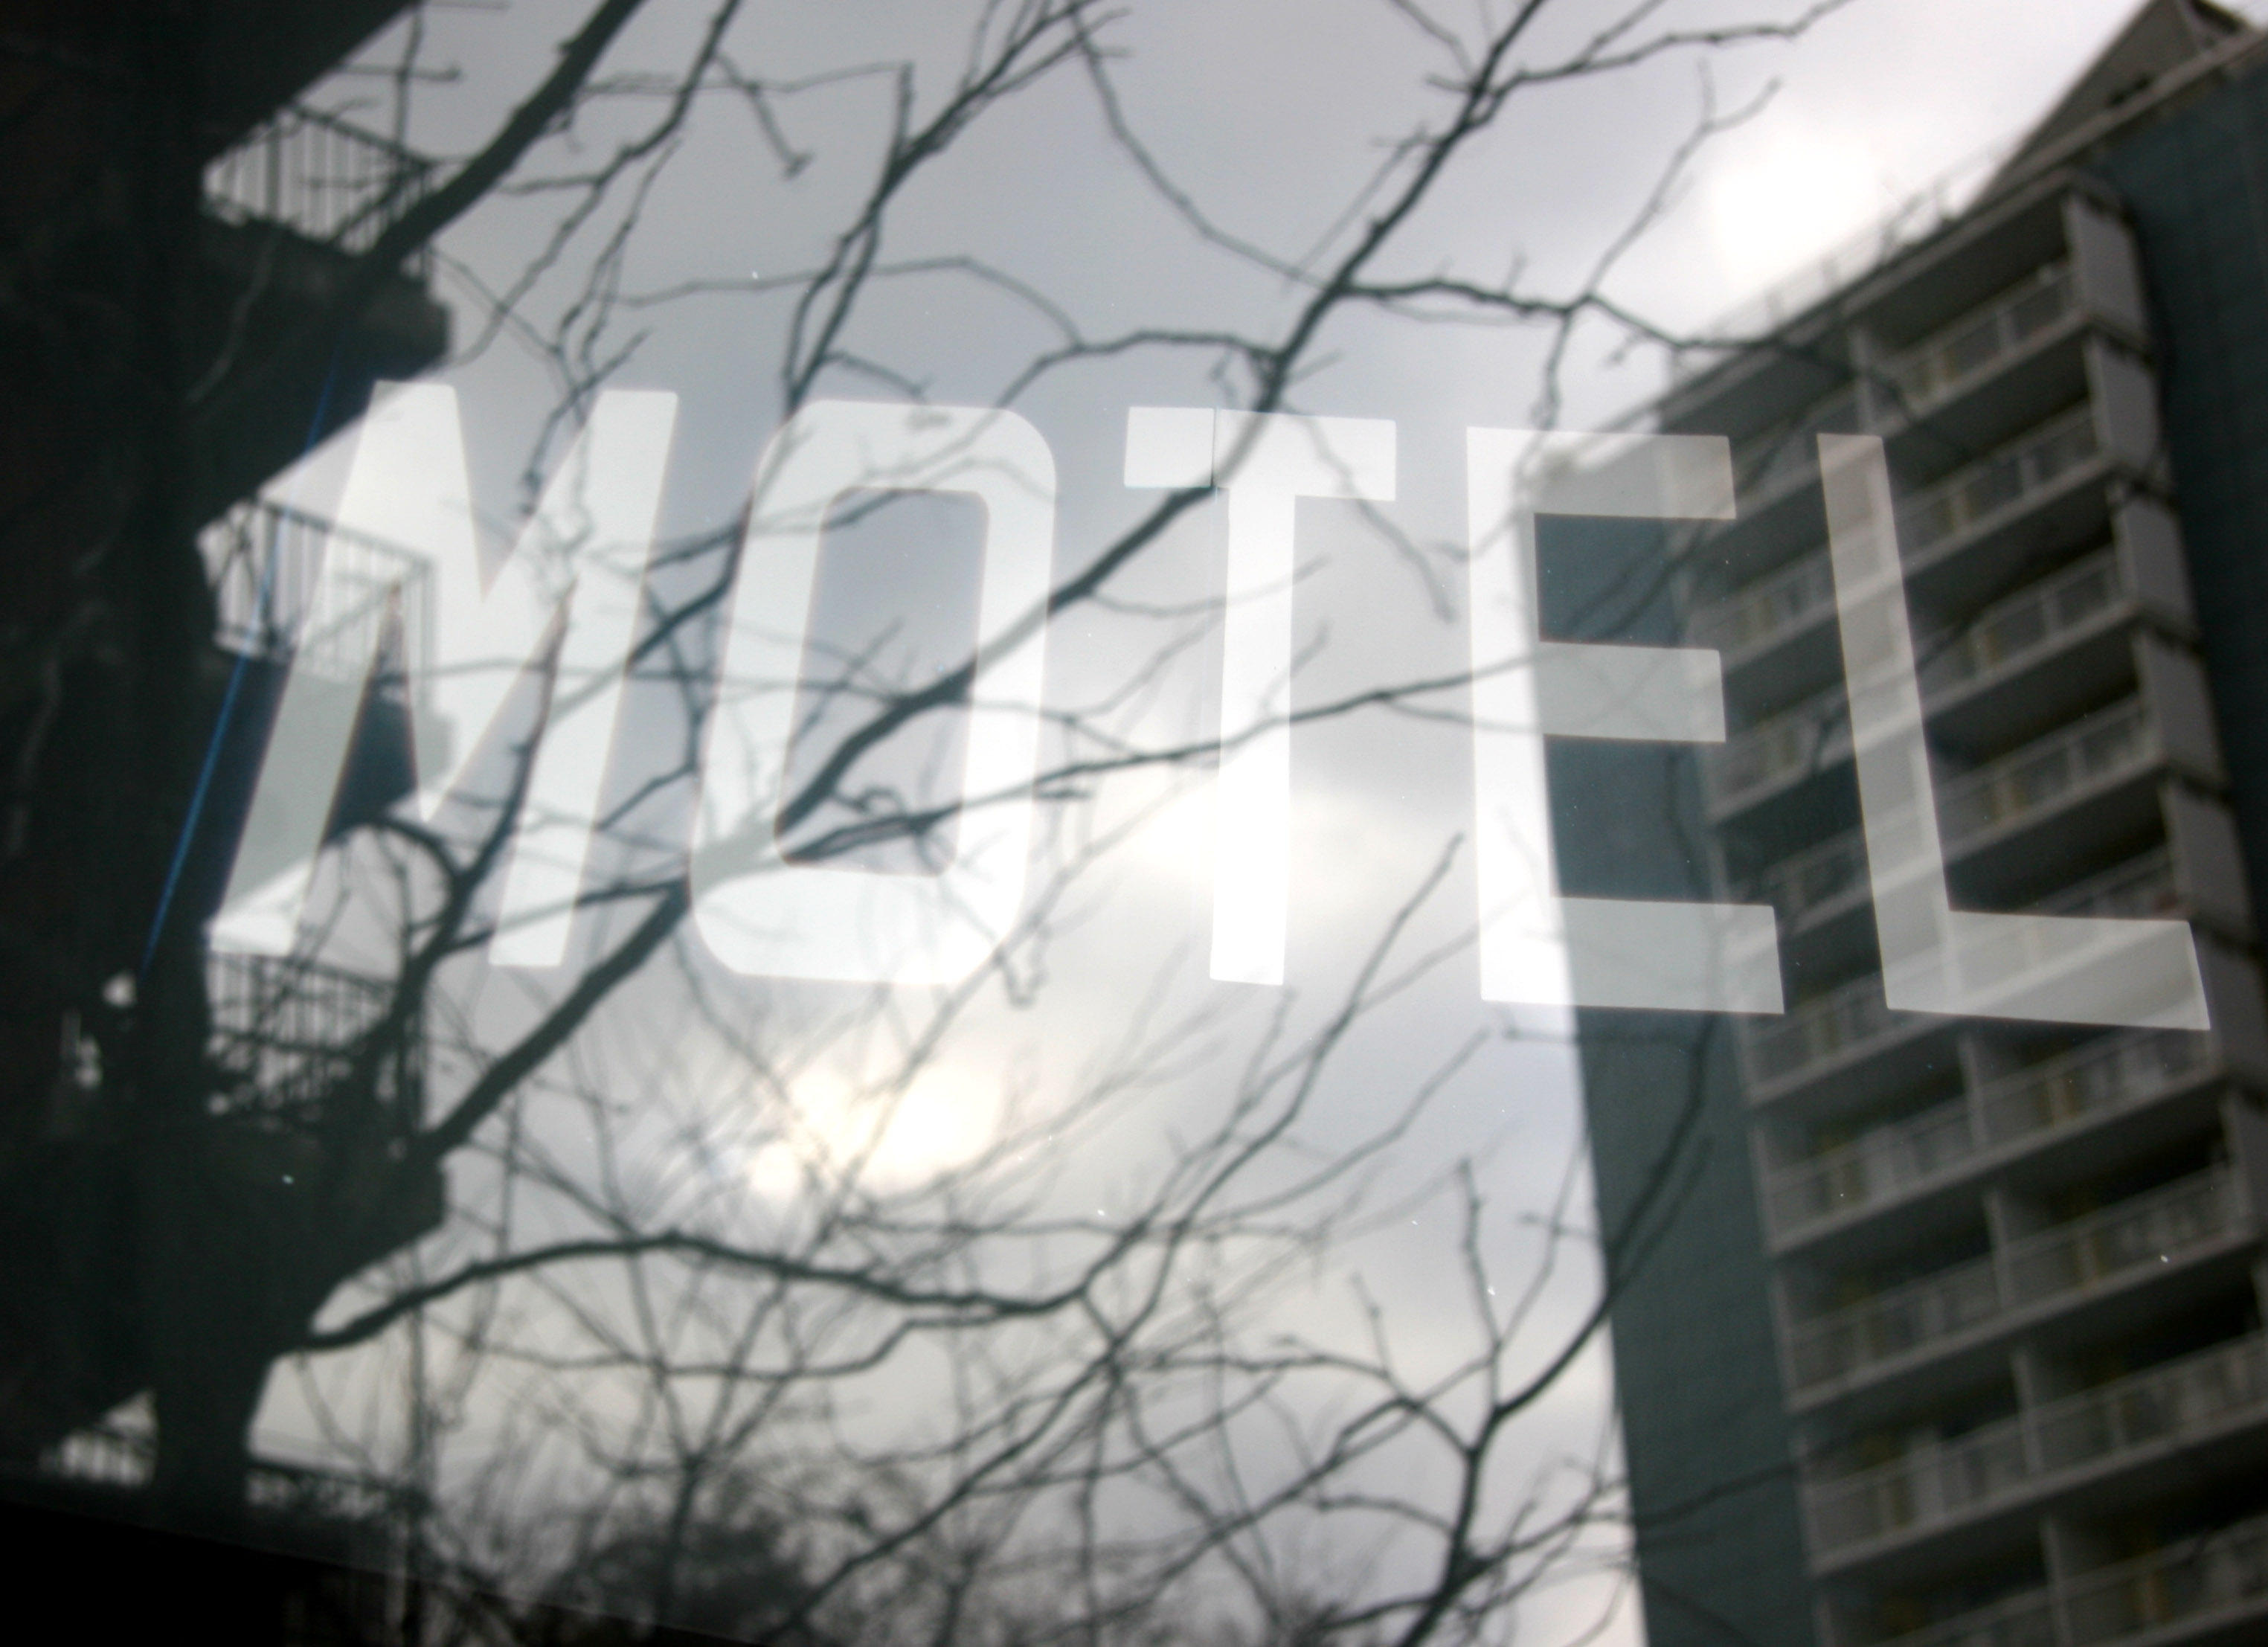 Motel Sign  with Window Reflection of LaGuardia Place Residences